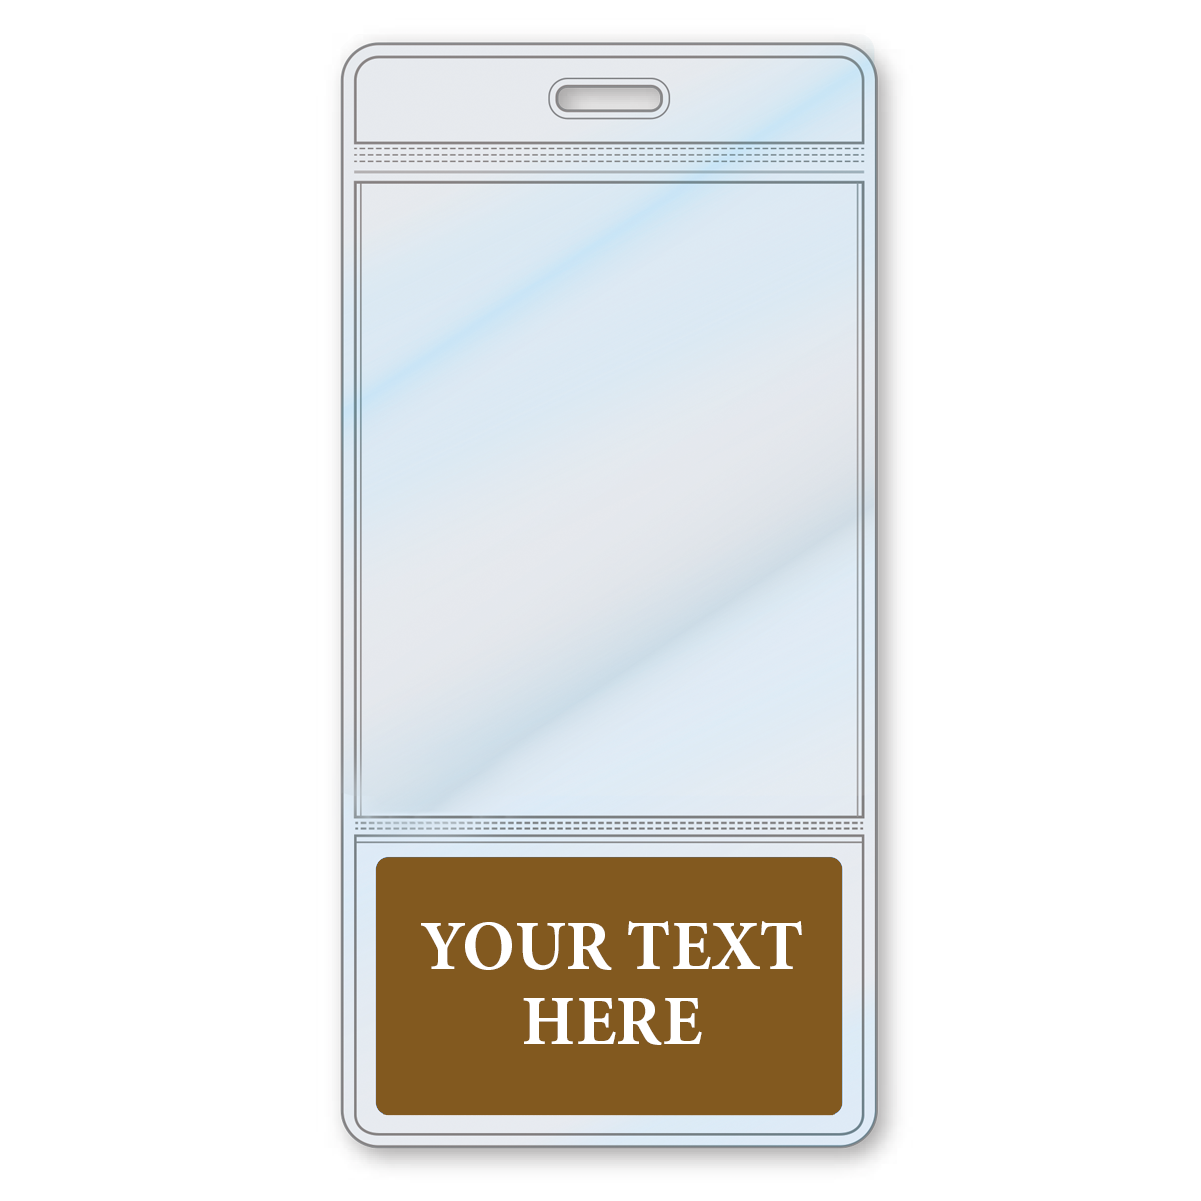 A Custom Printed BadgeBottoms® Vertical (Badge Holder & Badge Buddy IN ONE!!) with a clear section for a photo and a brown bottom section labeled "YOUR TEXT HERE." The customizable badge holder features a slot at the top for easy attachment.